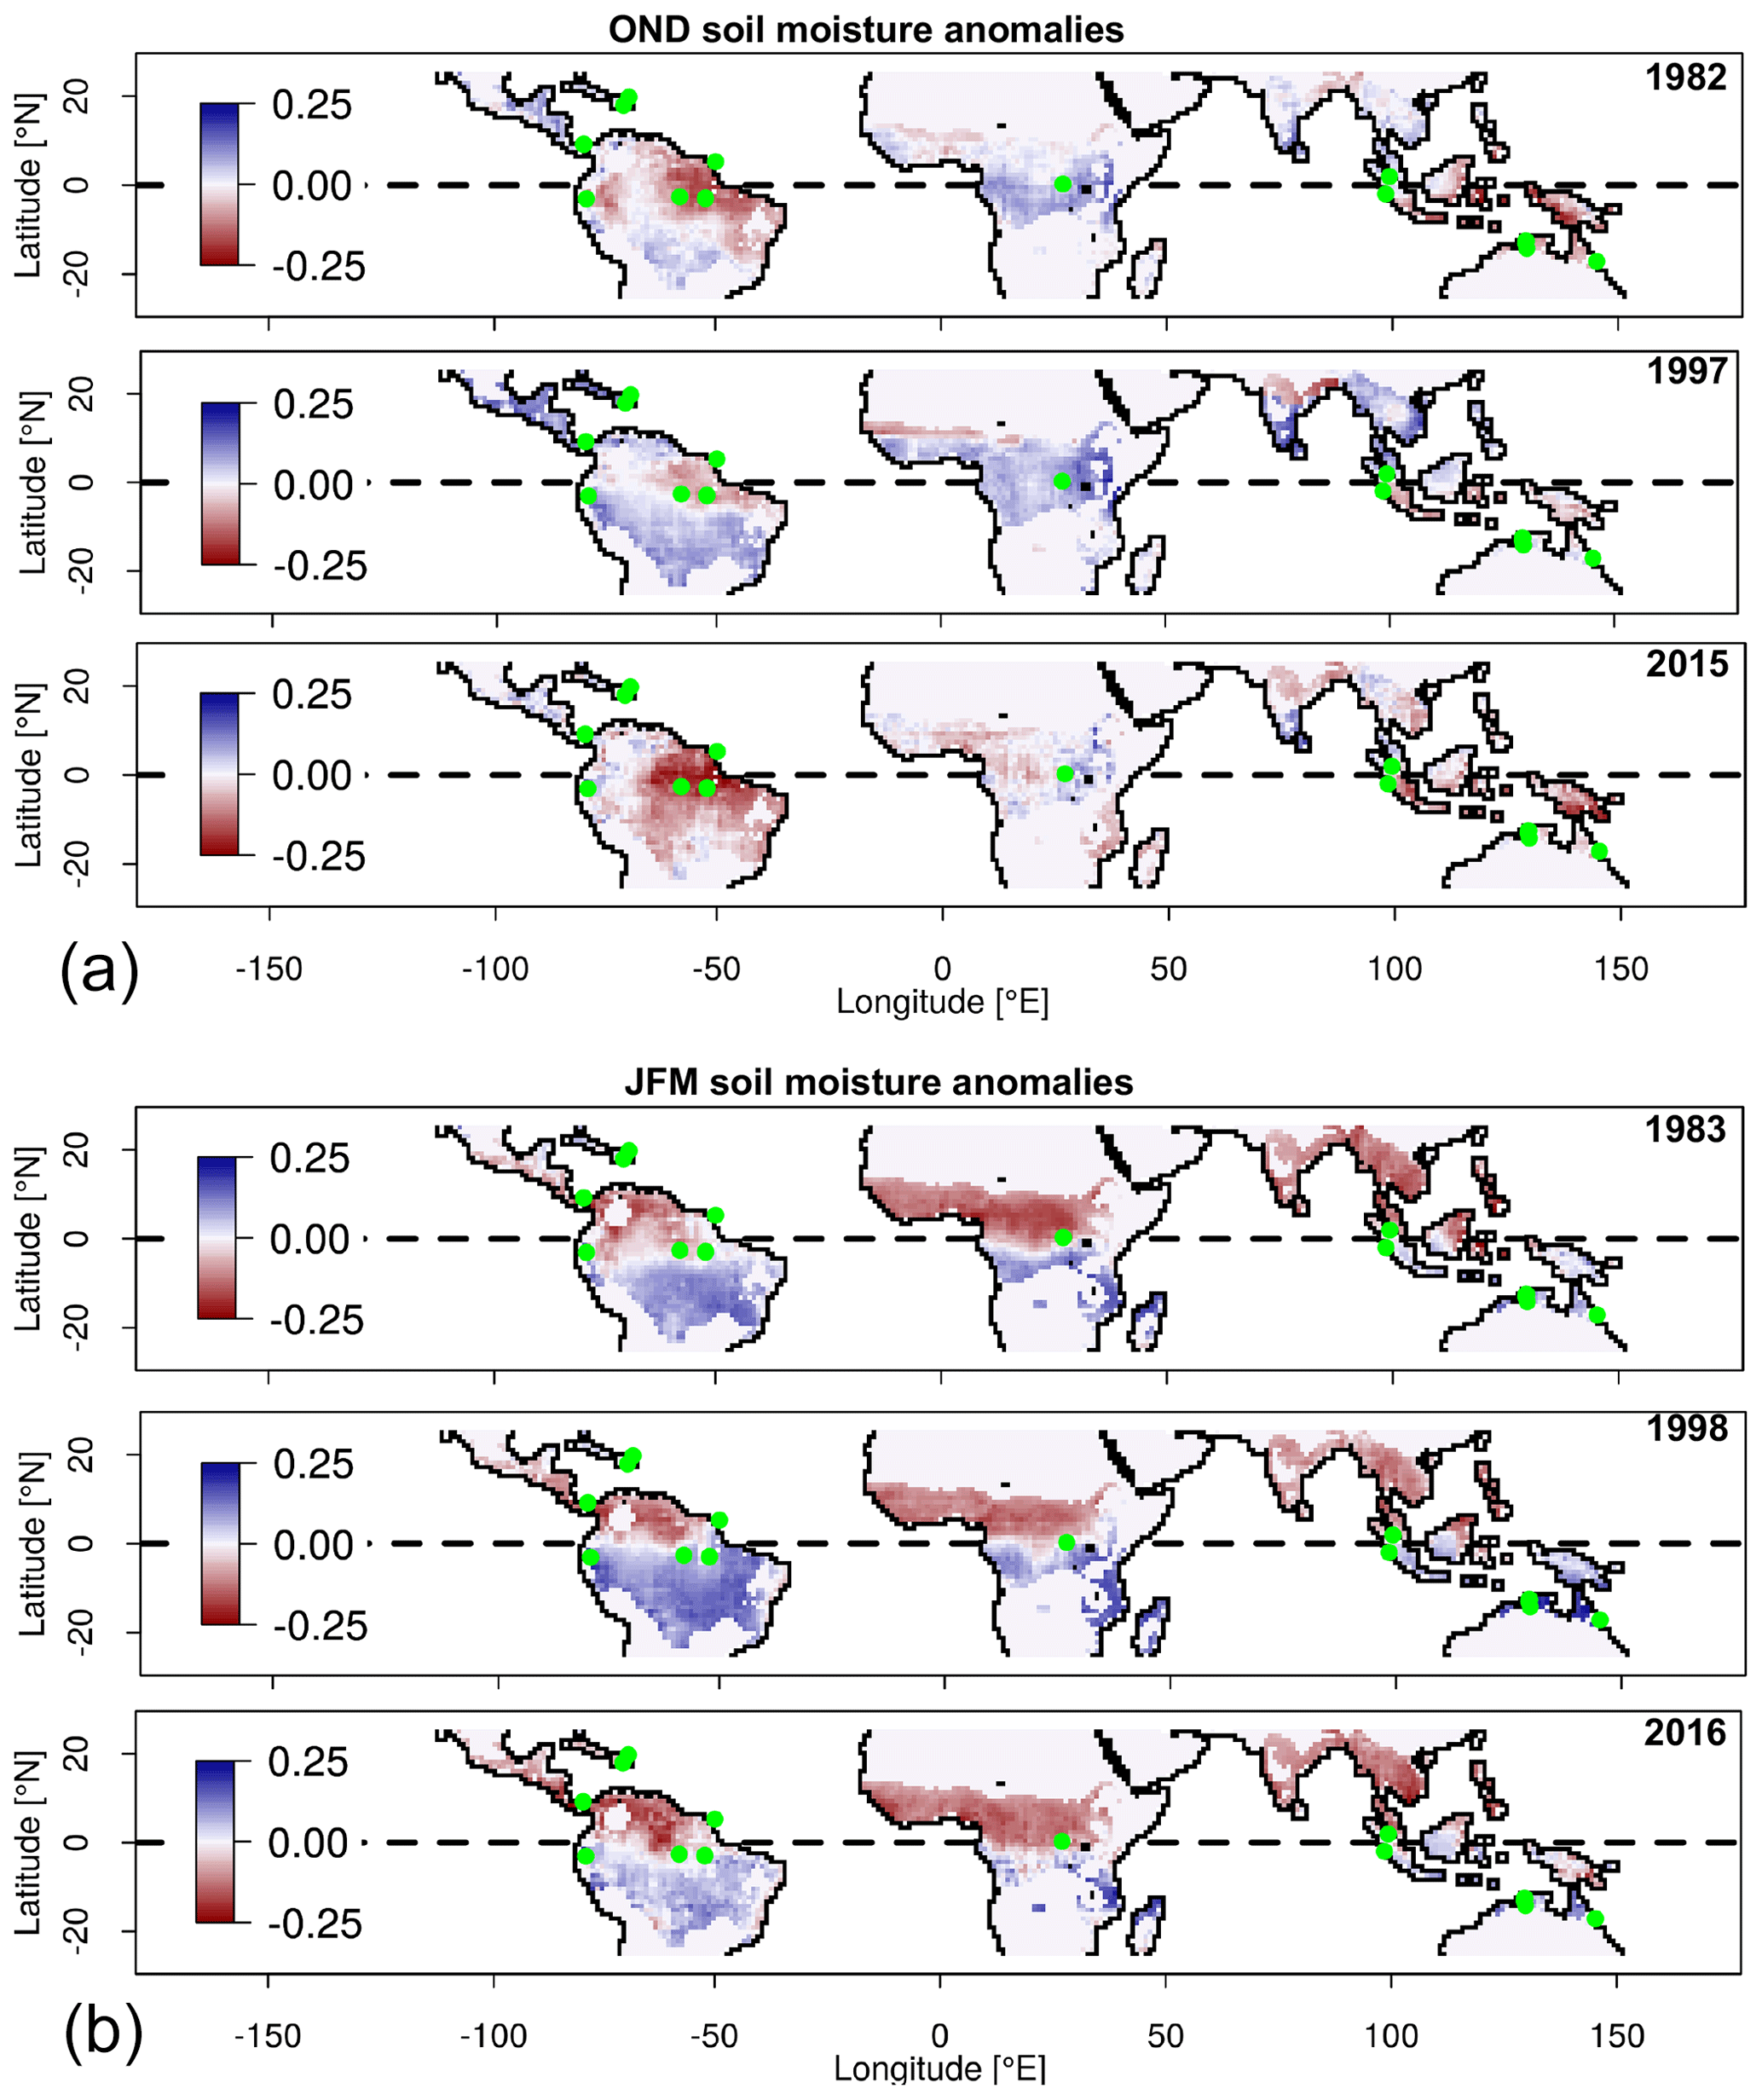 Soil moisture anomalies during super El Niño years during the months of October, November, December (OND) or January, February, March (JFM).